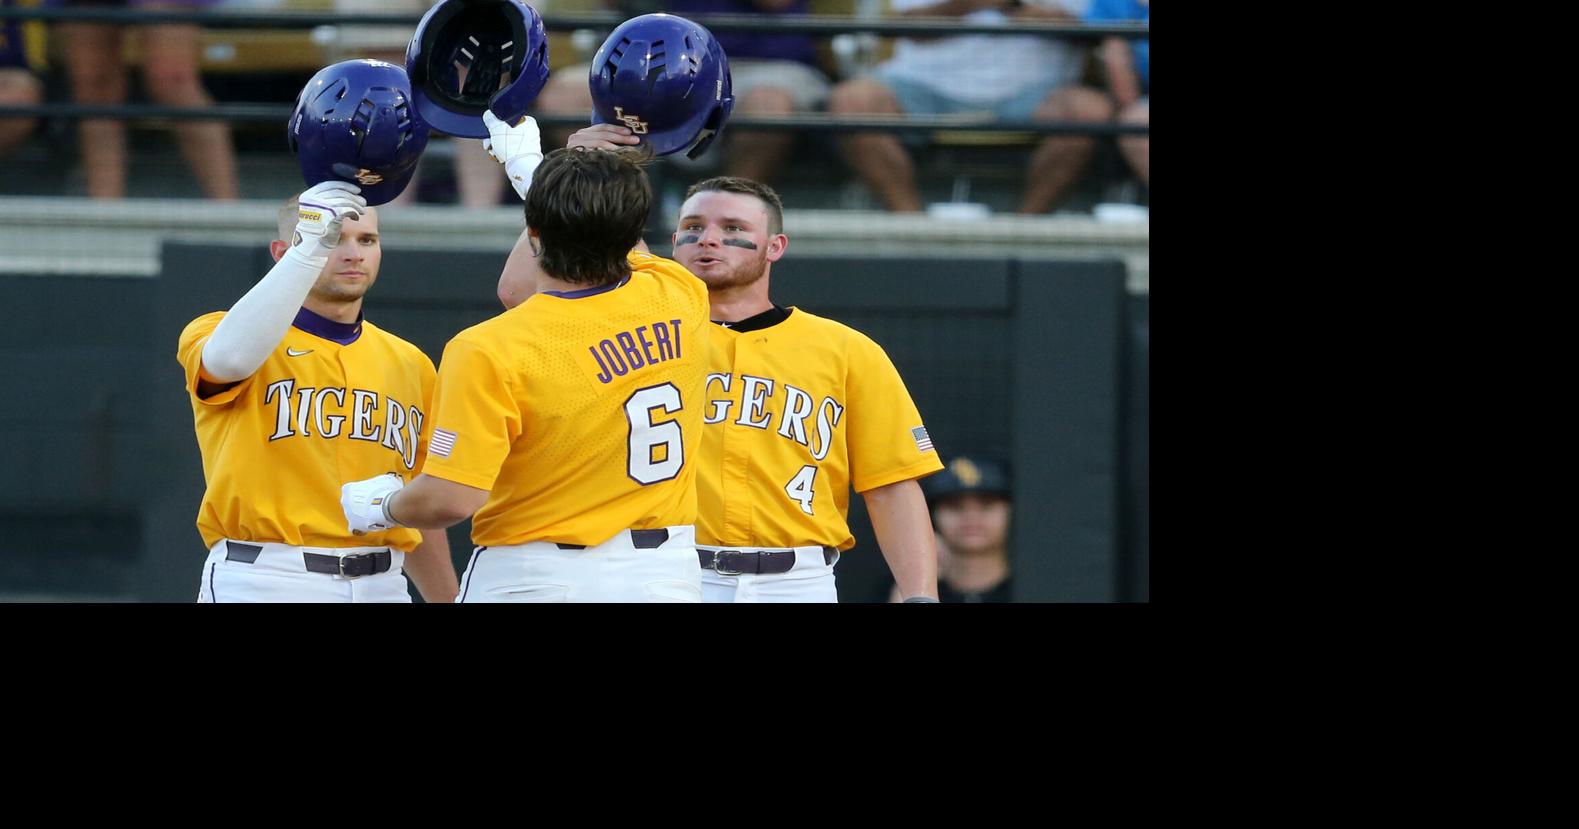 LSU's 10 runs in the 8th inning help capture 14-11 comeback win over Kennesaw State